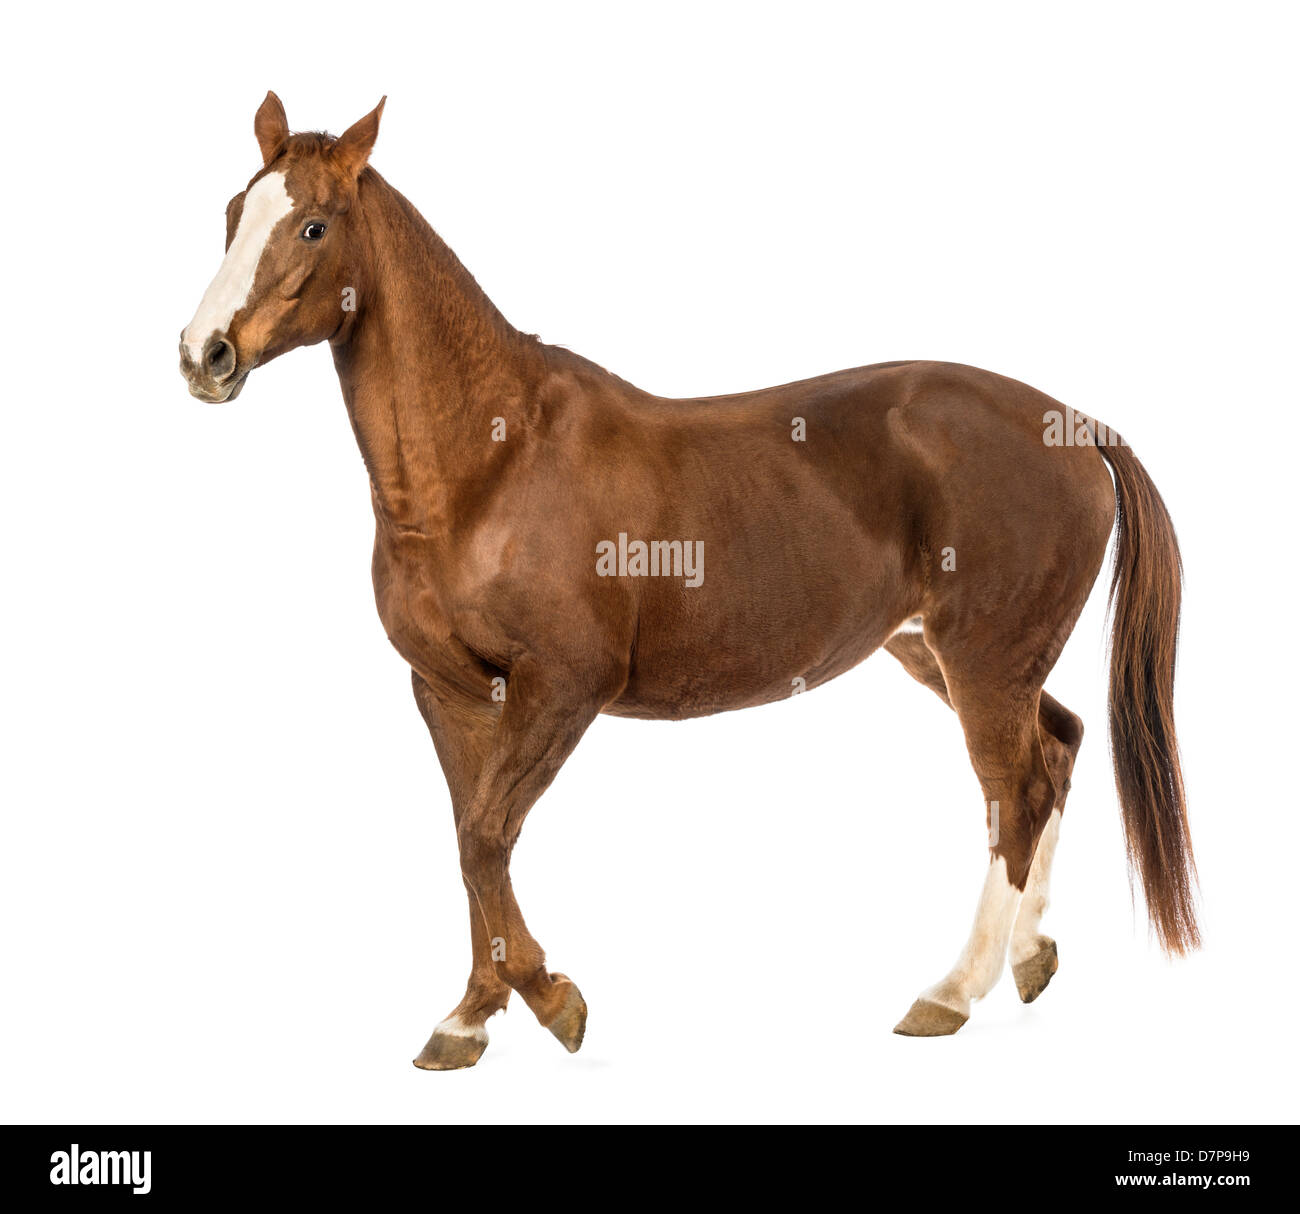 Side view of a Horse walking against white background Stock Photo